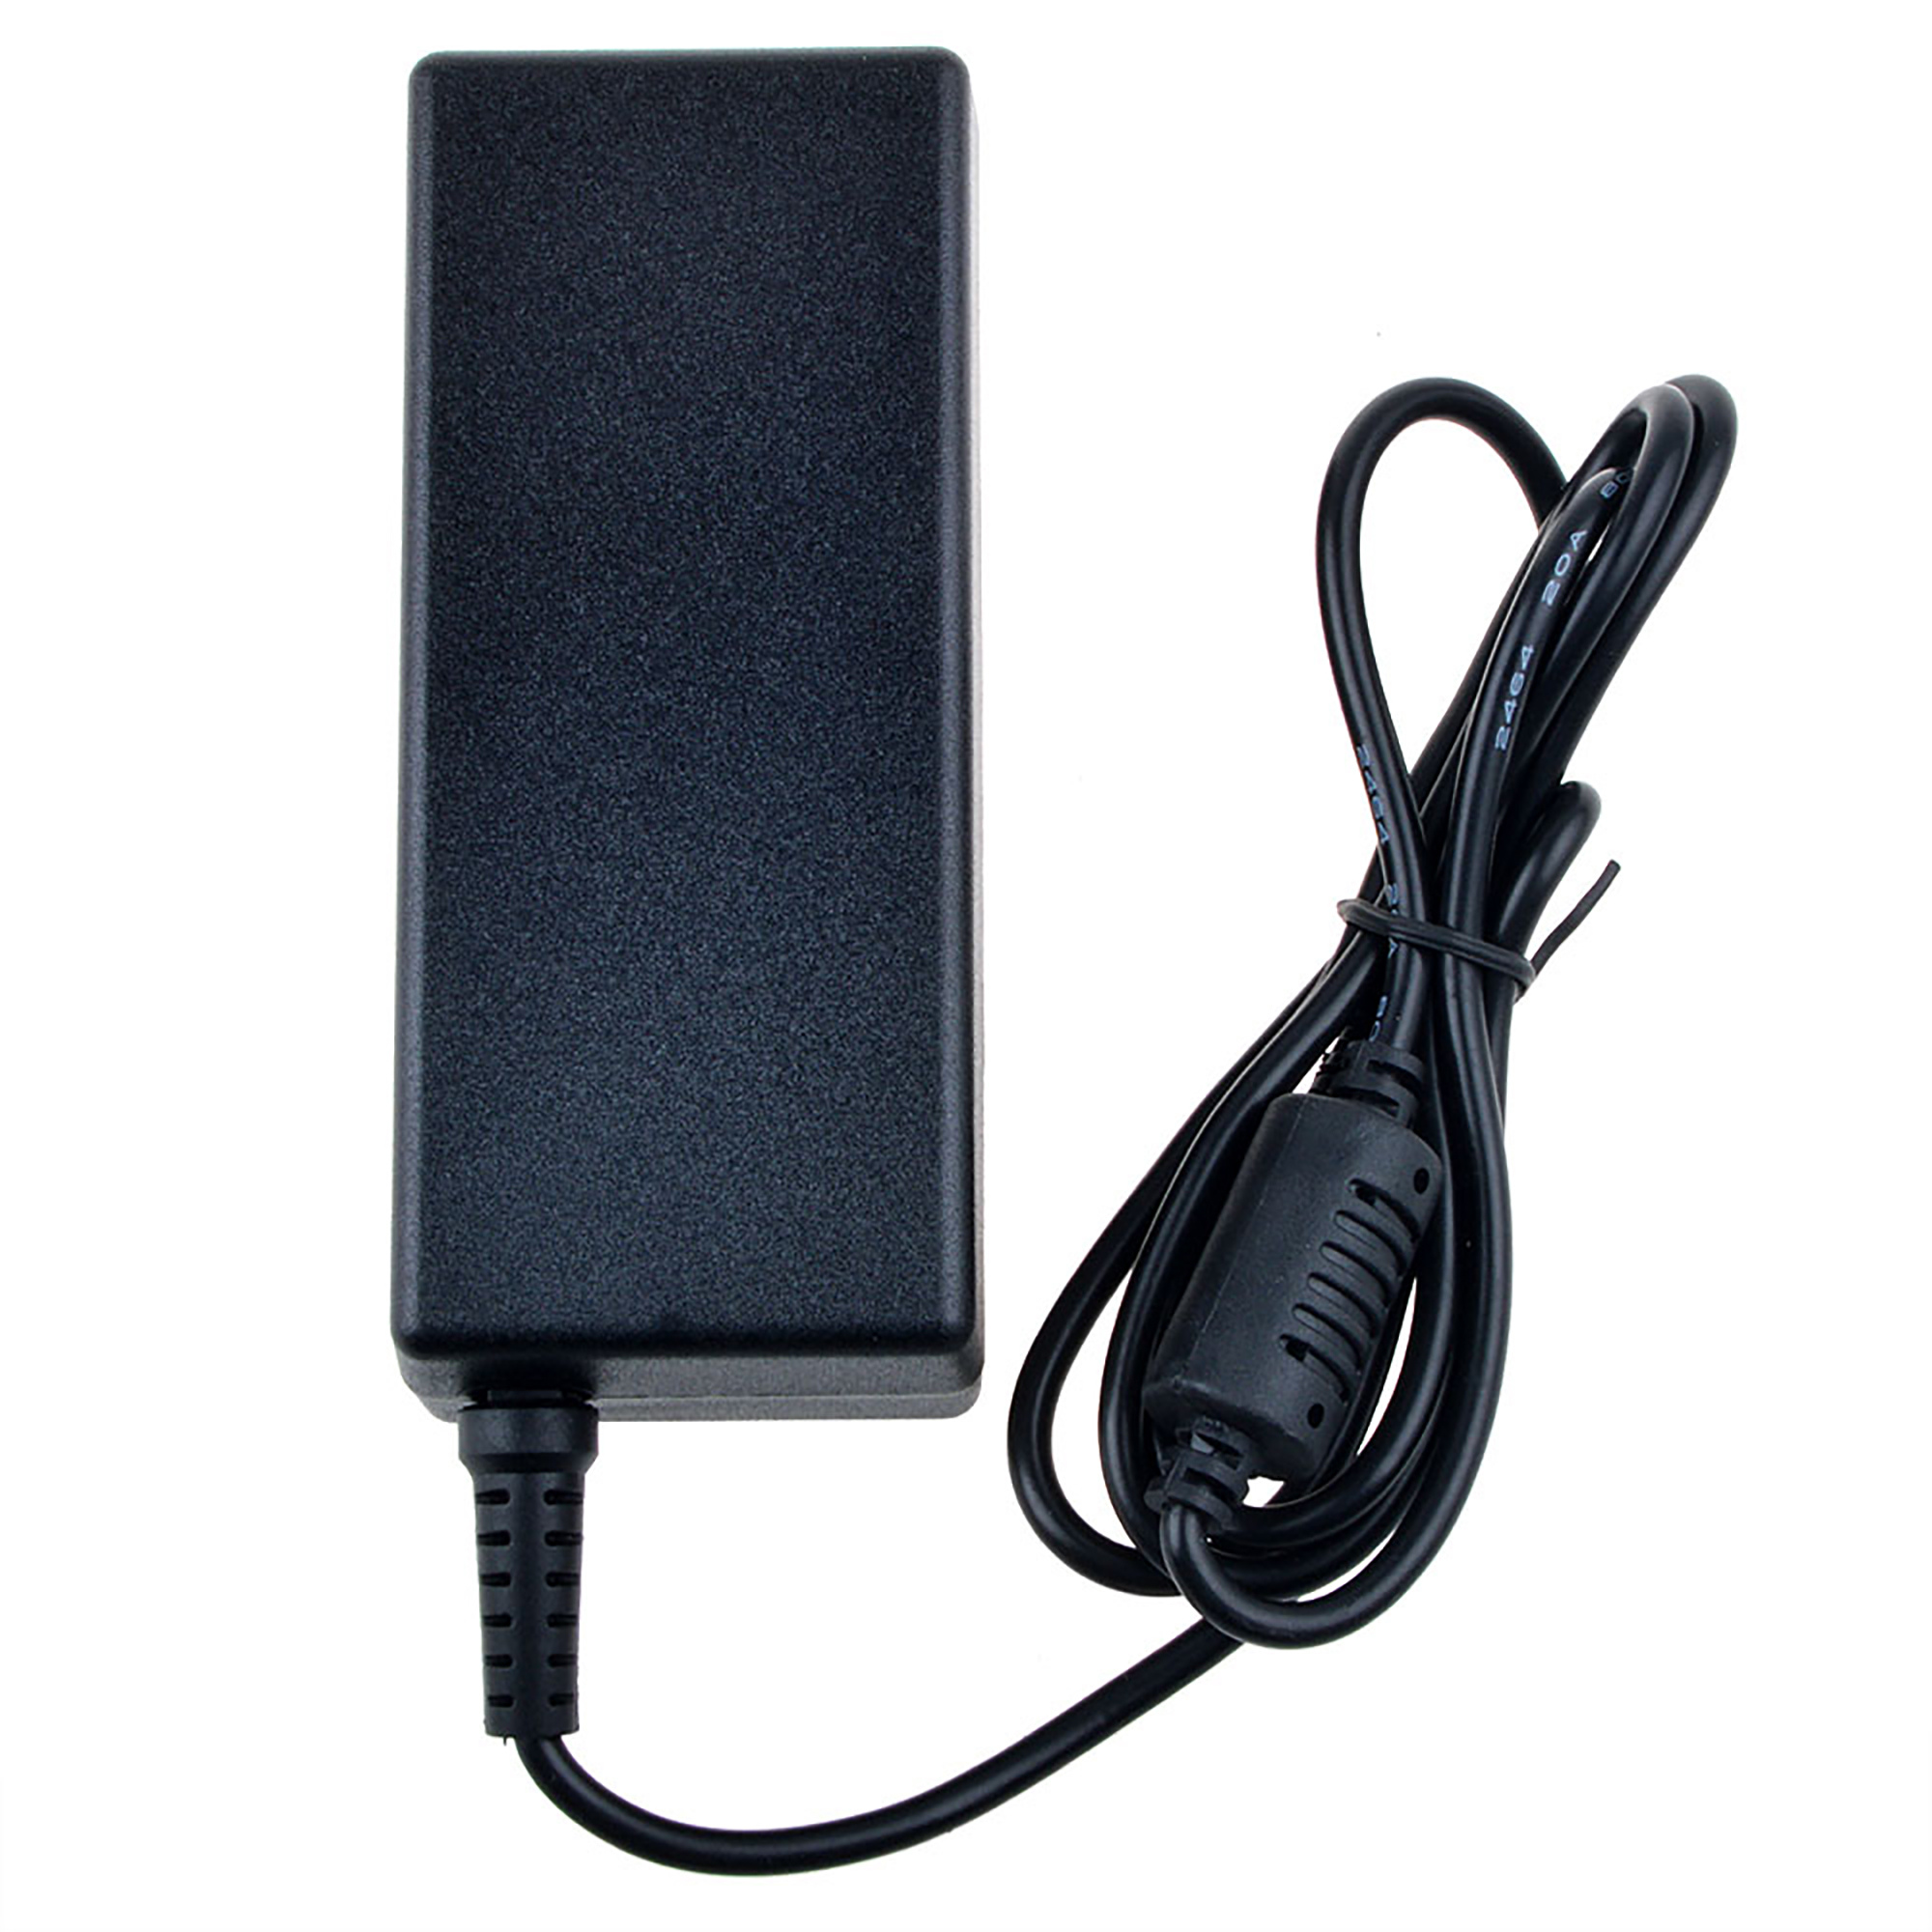 PKPOWER AC DC Adapter Replacement for LG SL6Y 3.1 Channel High-Resolution Sound Bar SoundBar Power - image 2 of 5